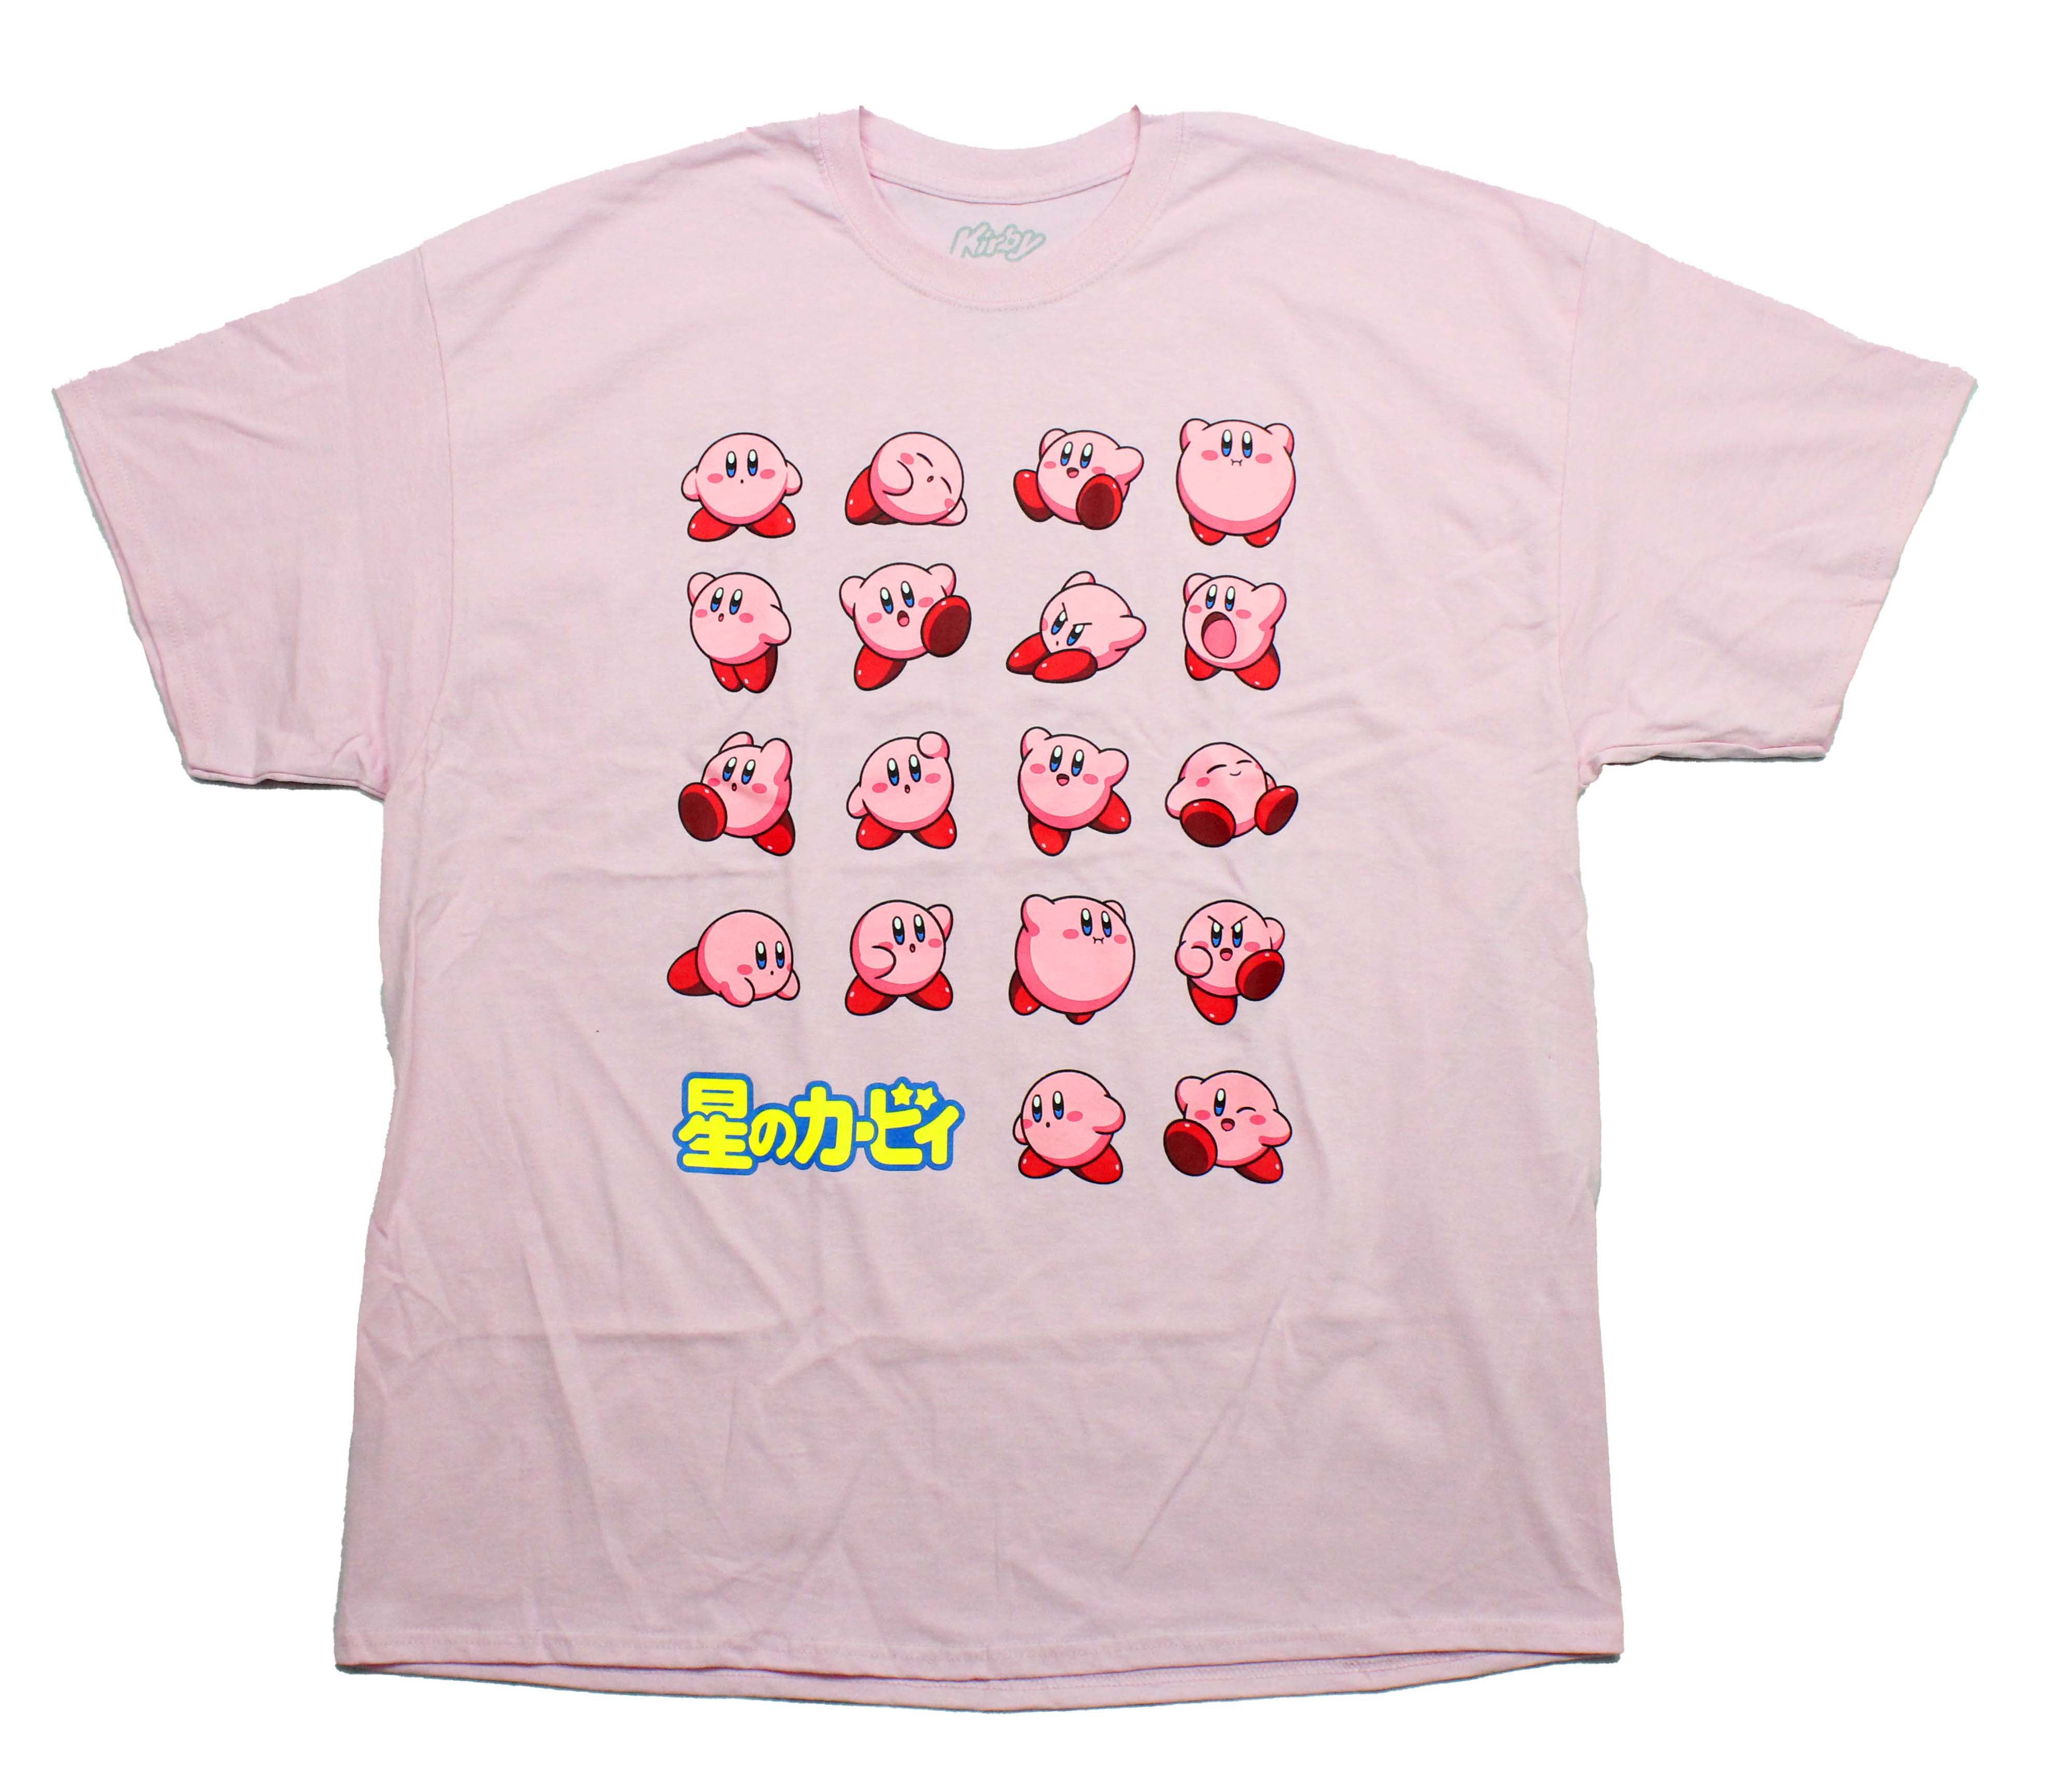 Kirby Mens T-Shirt -Just Kirby Motion Lineup with Kanji